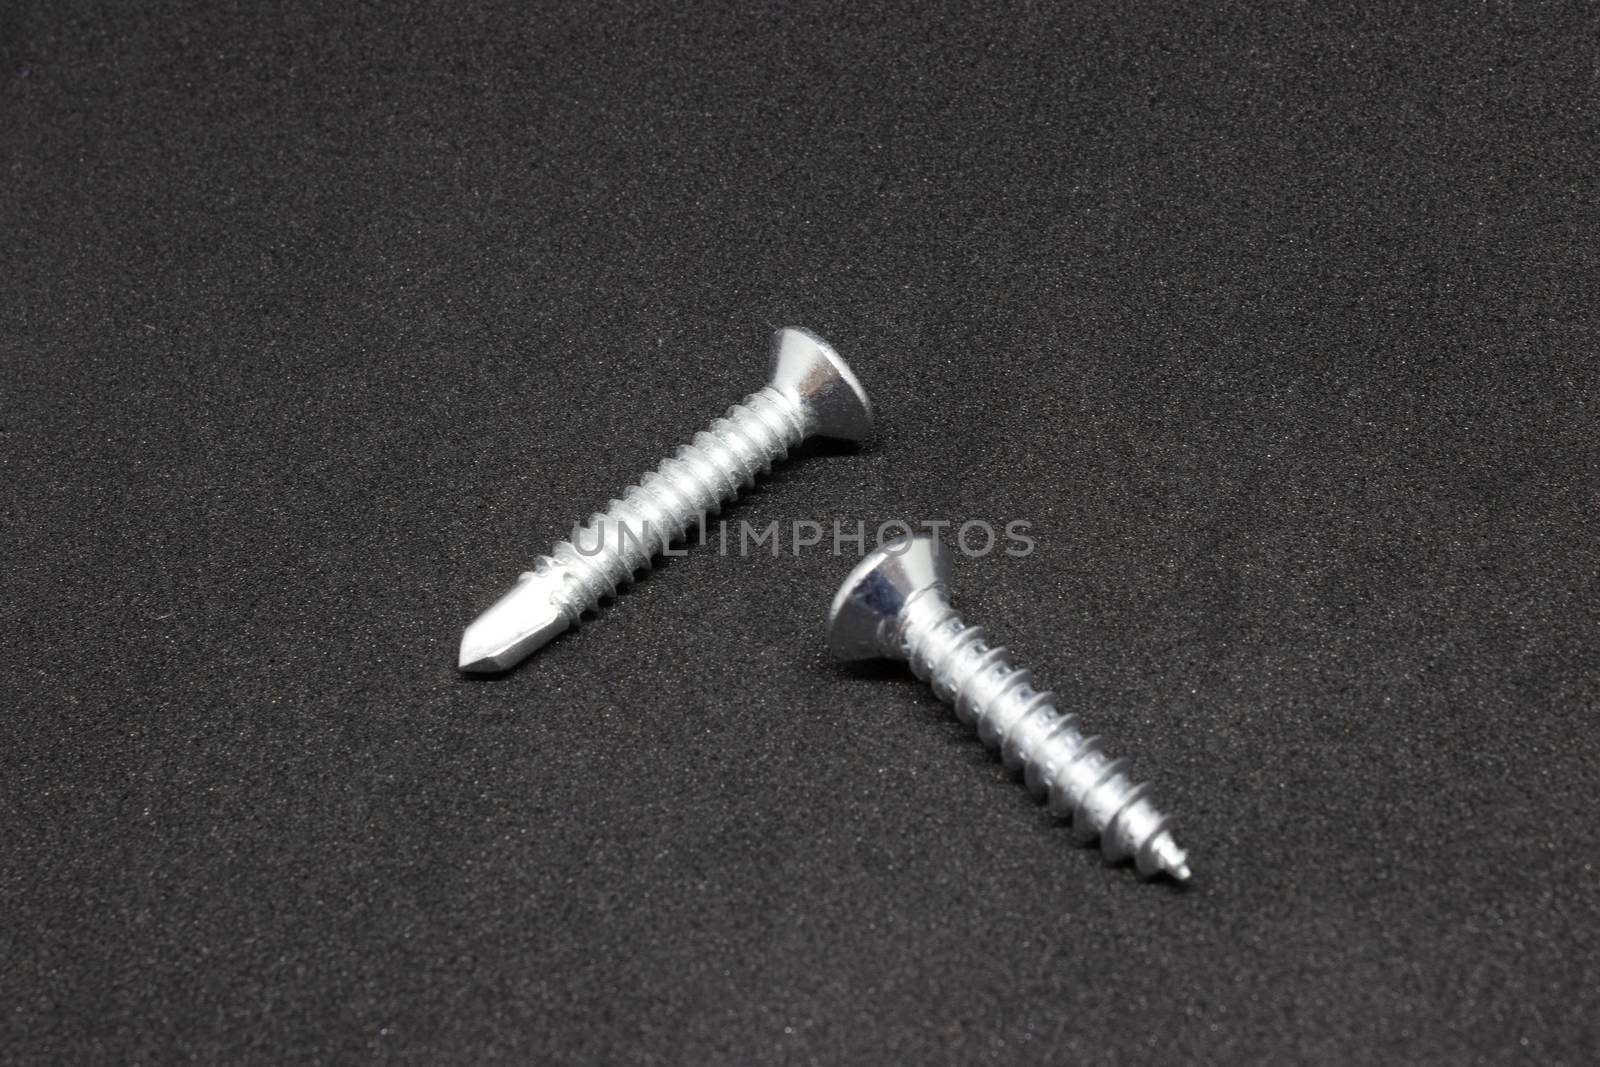 some isolated metal screw closeup shoot. photo has taken with photobox with black background.